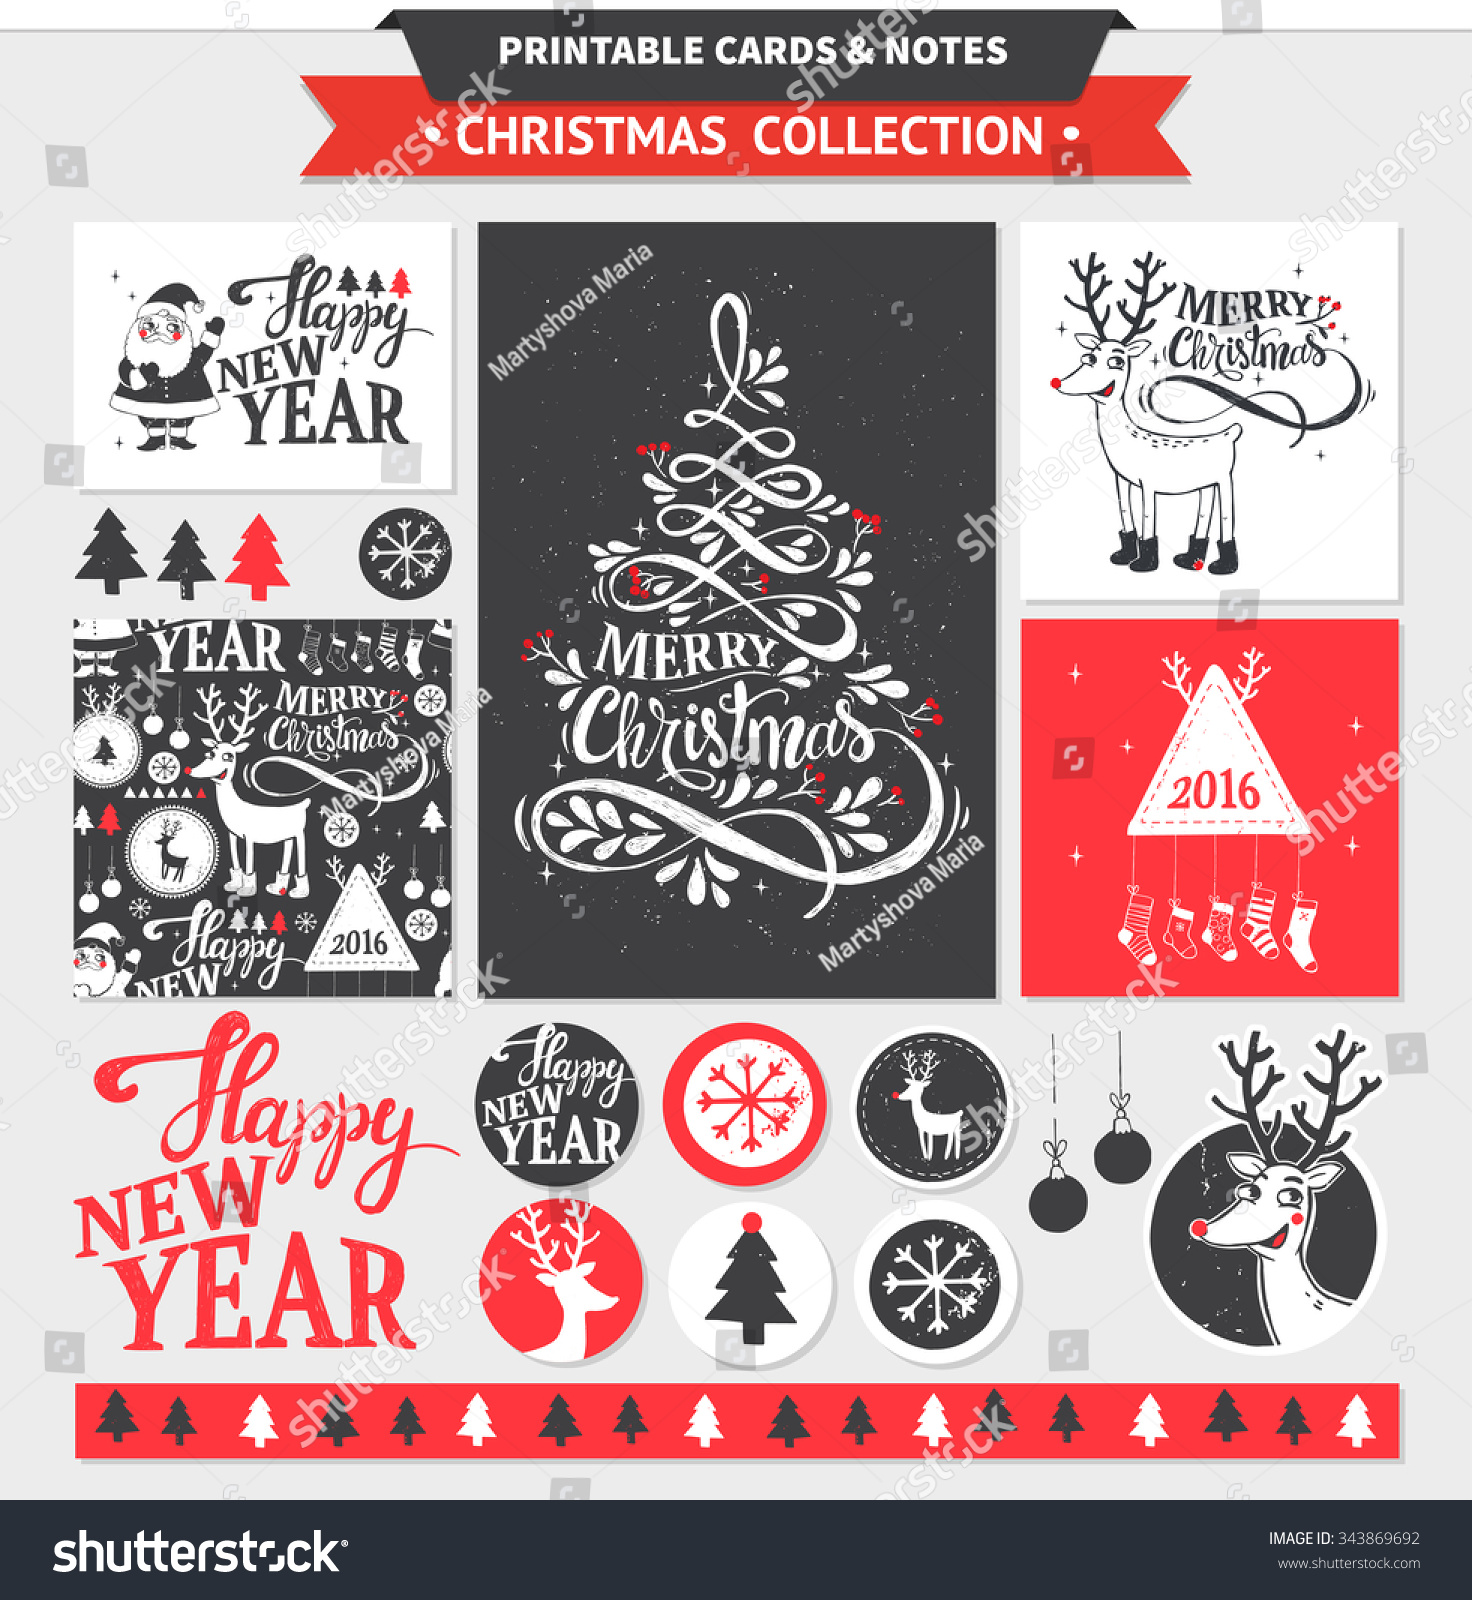 Hipster New Year and Merry Christmas set Vector printable cards stickers and banners with